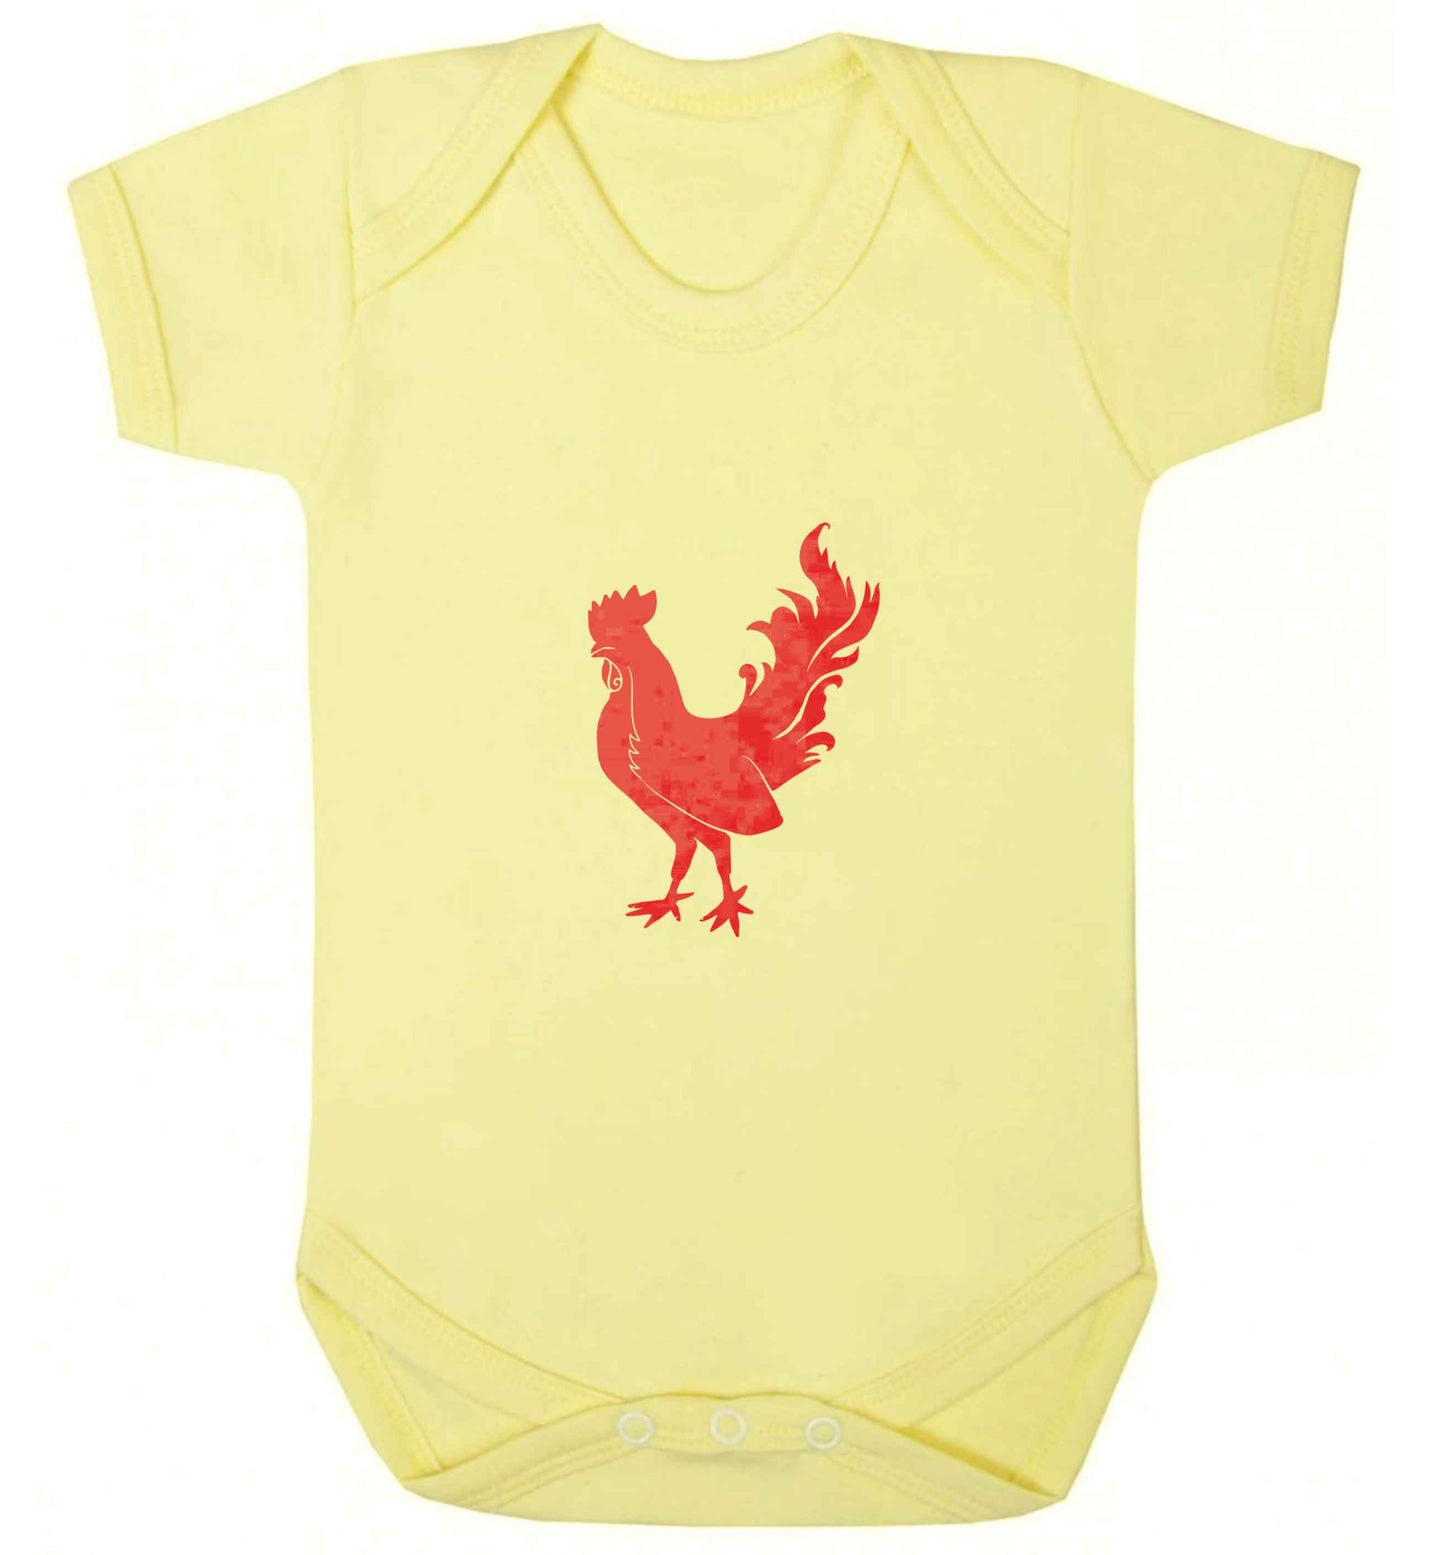 Rooster baby vest pale yellow 18-24 months